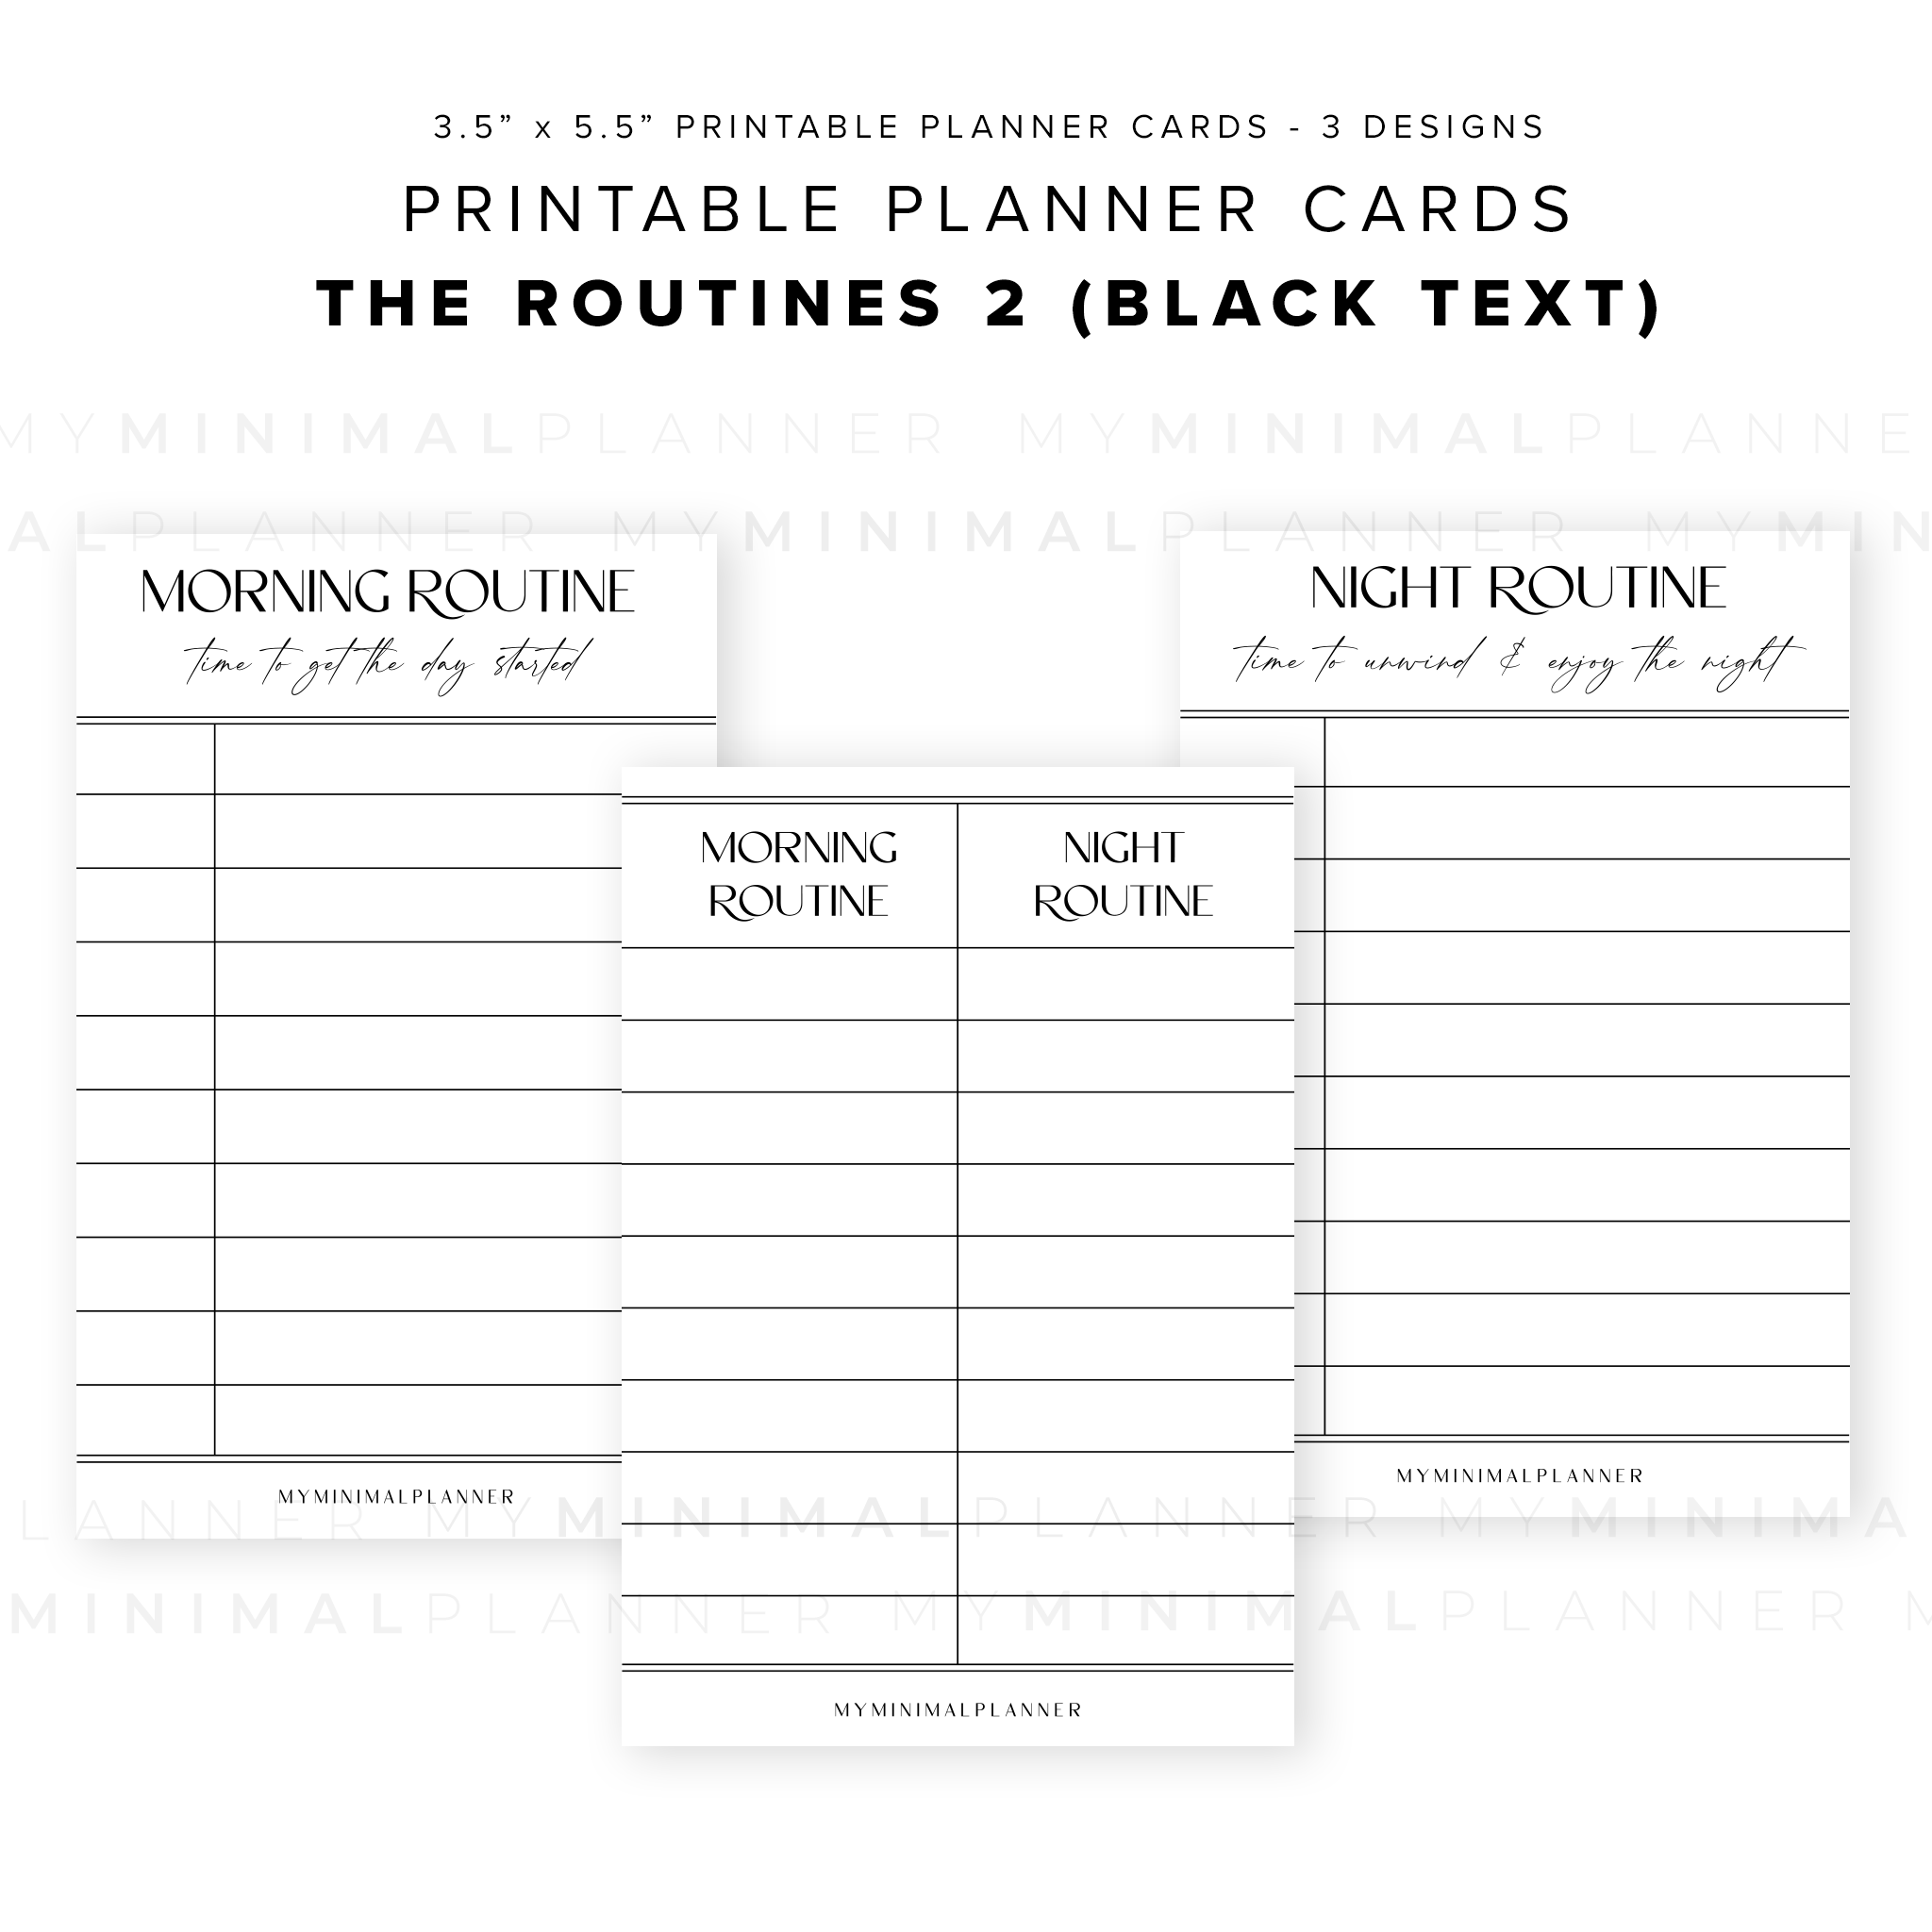 PPC22 - The Routines 2 - Printable Planner Cards